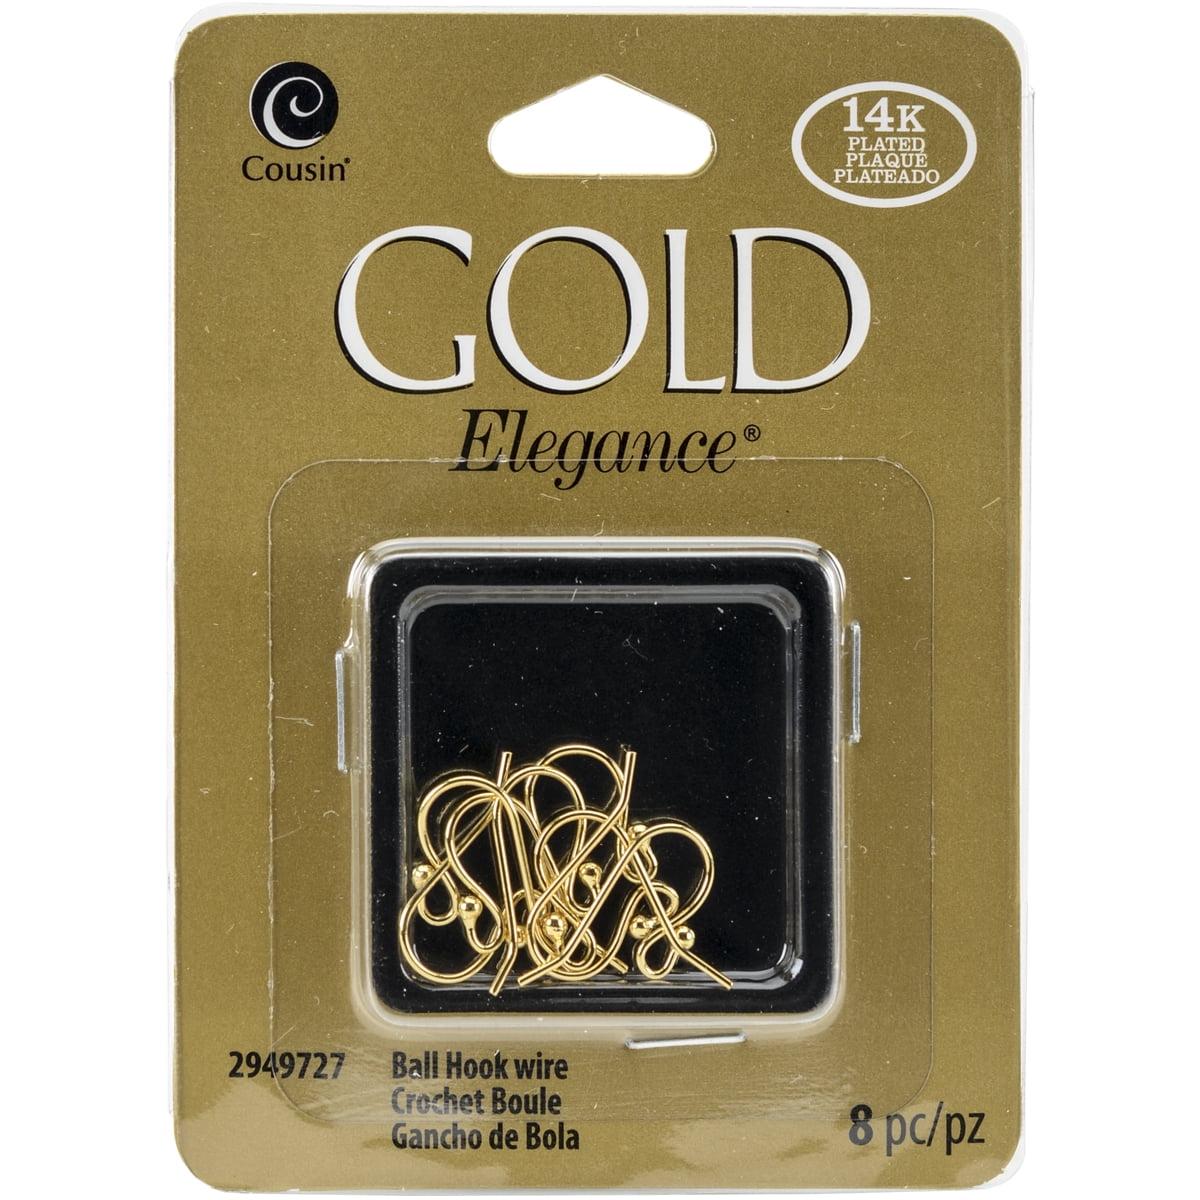 Elegance Gold Plated Jewelry Findings And Chain Assortment Bundle, 20 Piece  Bulk Finding Set